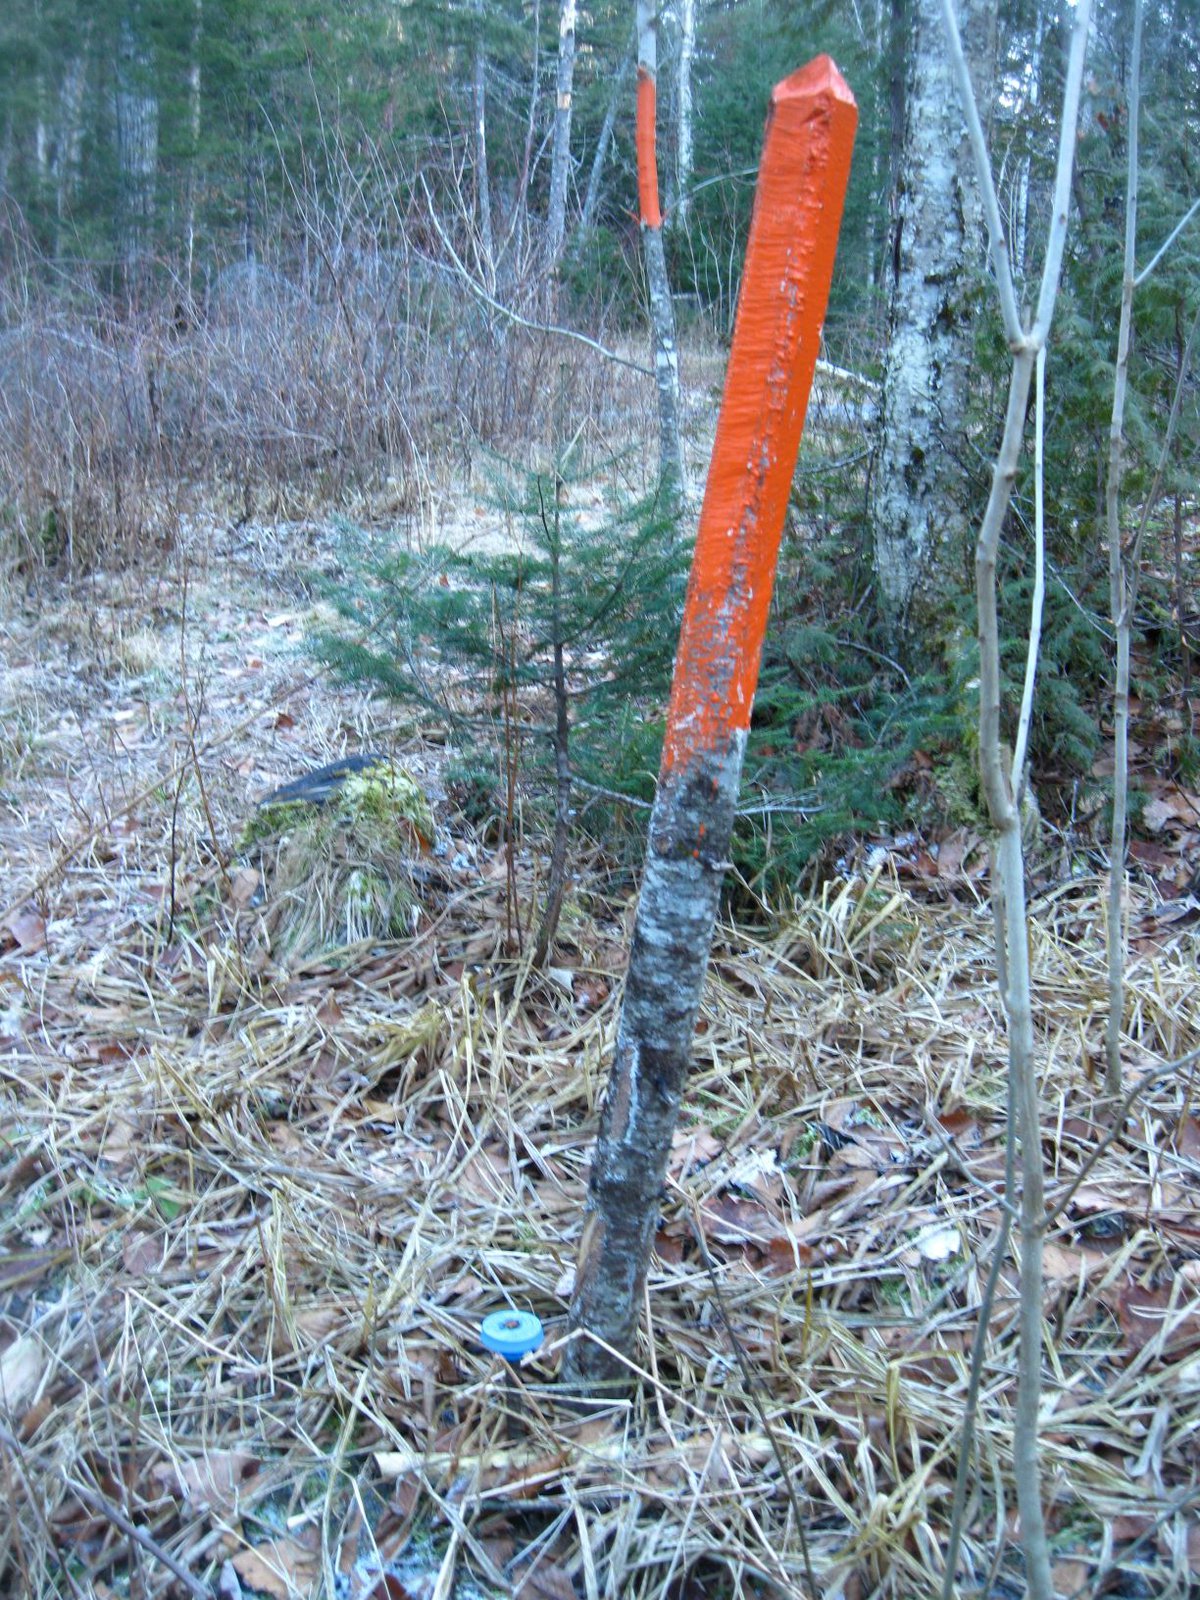 Can someone confirm that this is or is not a survey stake? : r